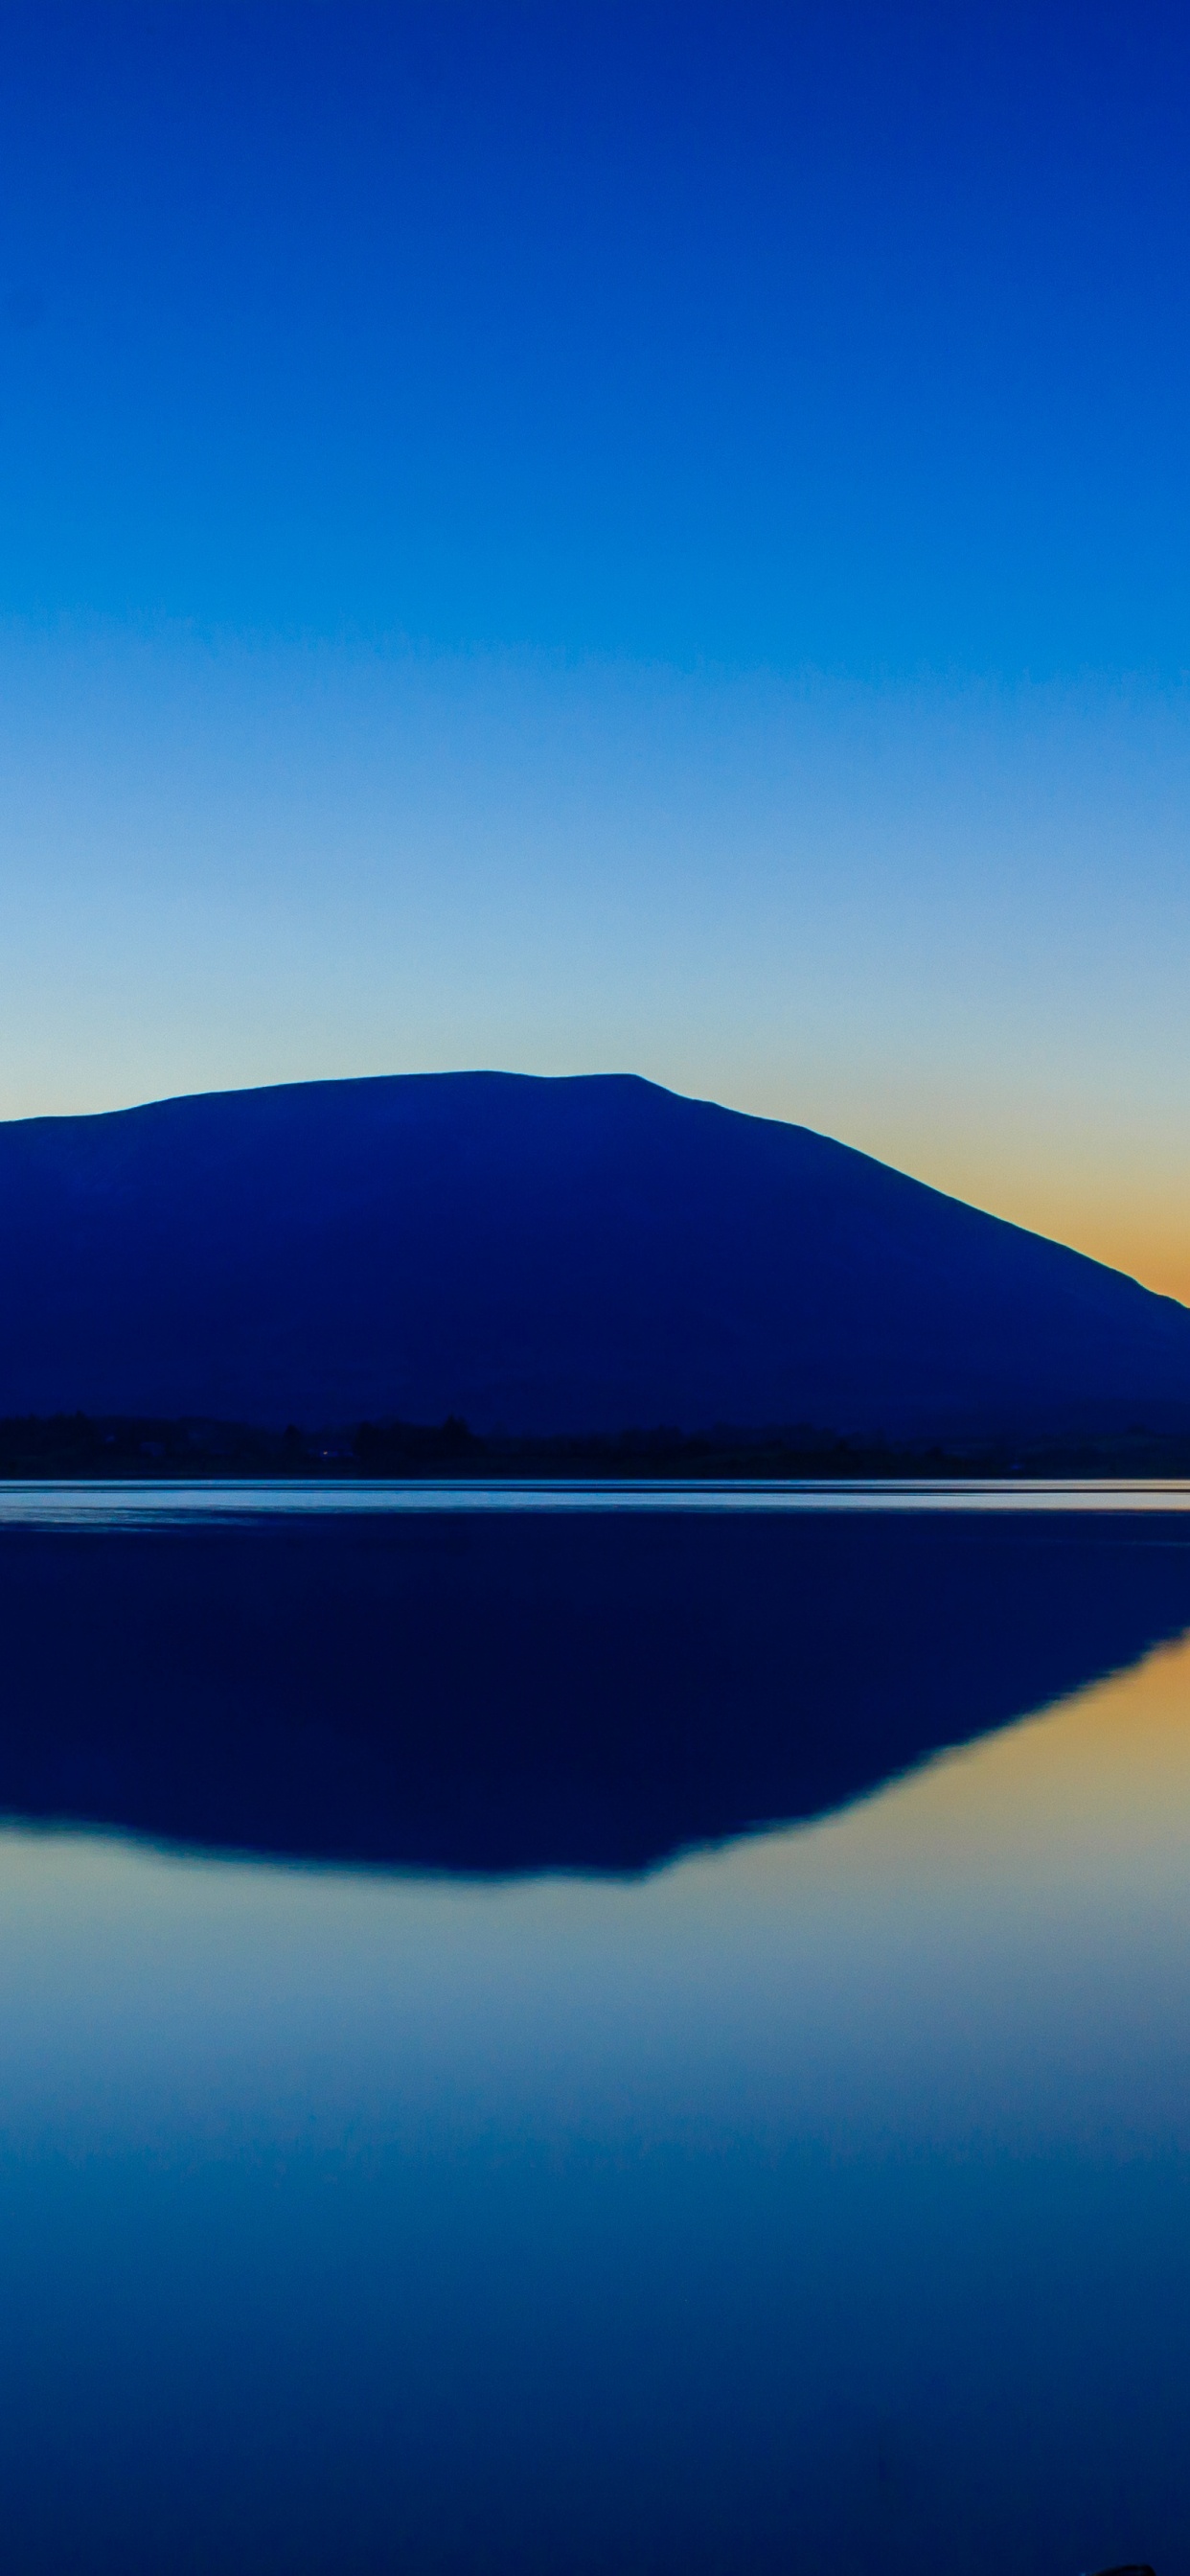 Body of Water Near Mountain Under Blue Sky During Daytime. Wallpaper in 1242x2688 Resolution